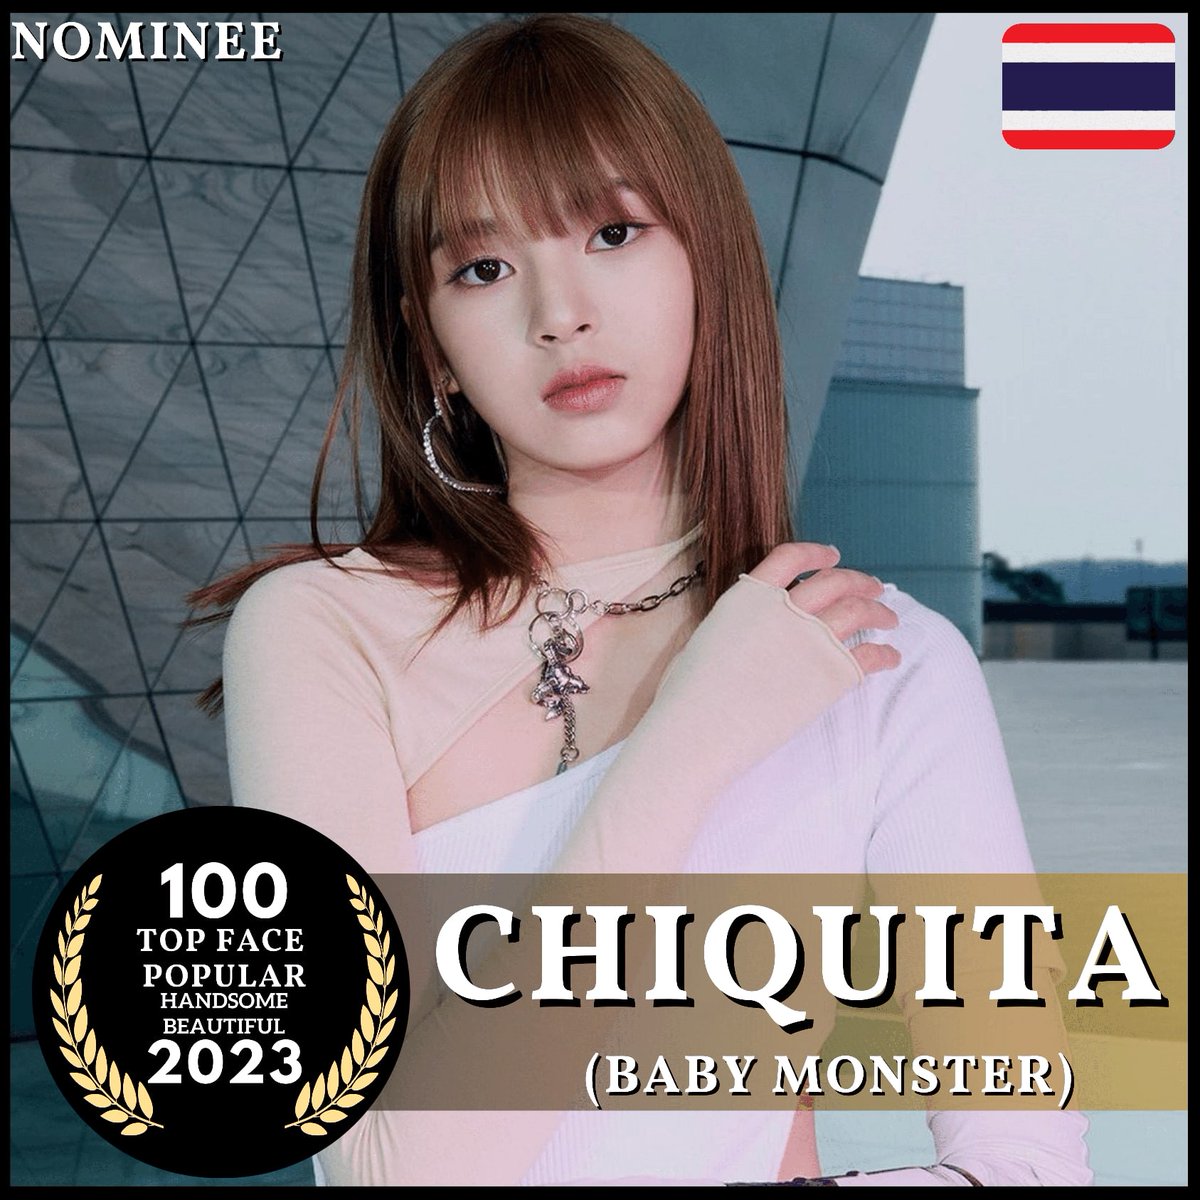 VOTE 100 TOP FACE HANDSOME BEAUTIFUL 2023 NOMINEE @_CQTth (THAILAND) VOTE BY COMMENT, LIKE AND SHARE WITH HASTAG #100topfacehandsomebeautiful2023 1 LIKE 5 VOTES 1 COMMENT 3 VOTES 1 SHARE 10 VOTES FOLLOW and VOTE IN INSTAGRAM @entertainment_award #CHIQUITA #BABYMONSTER #YG